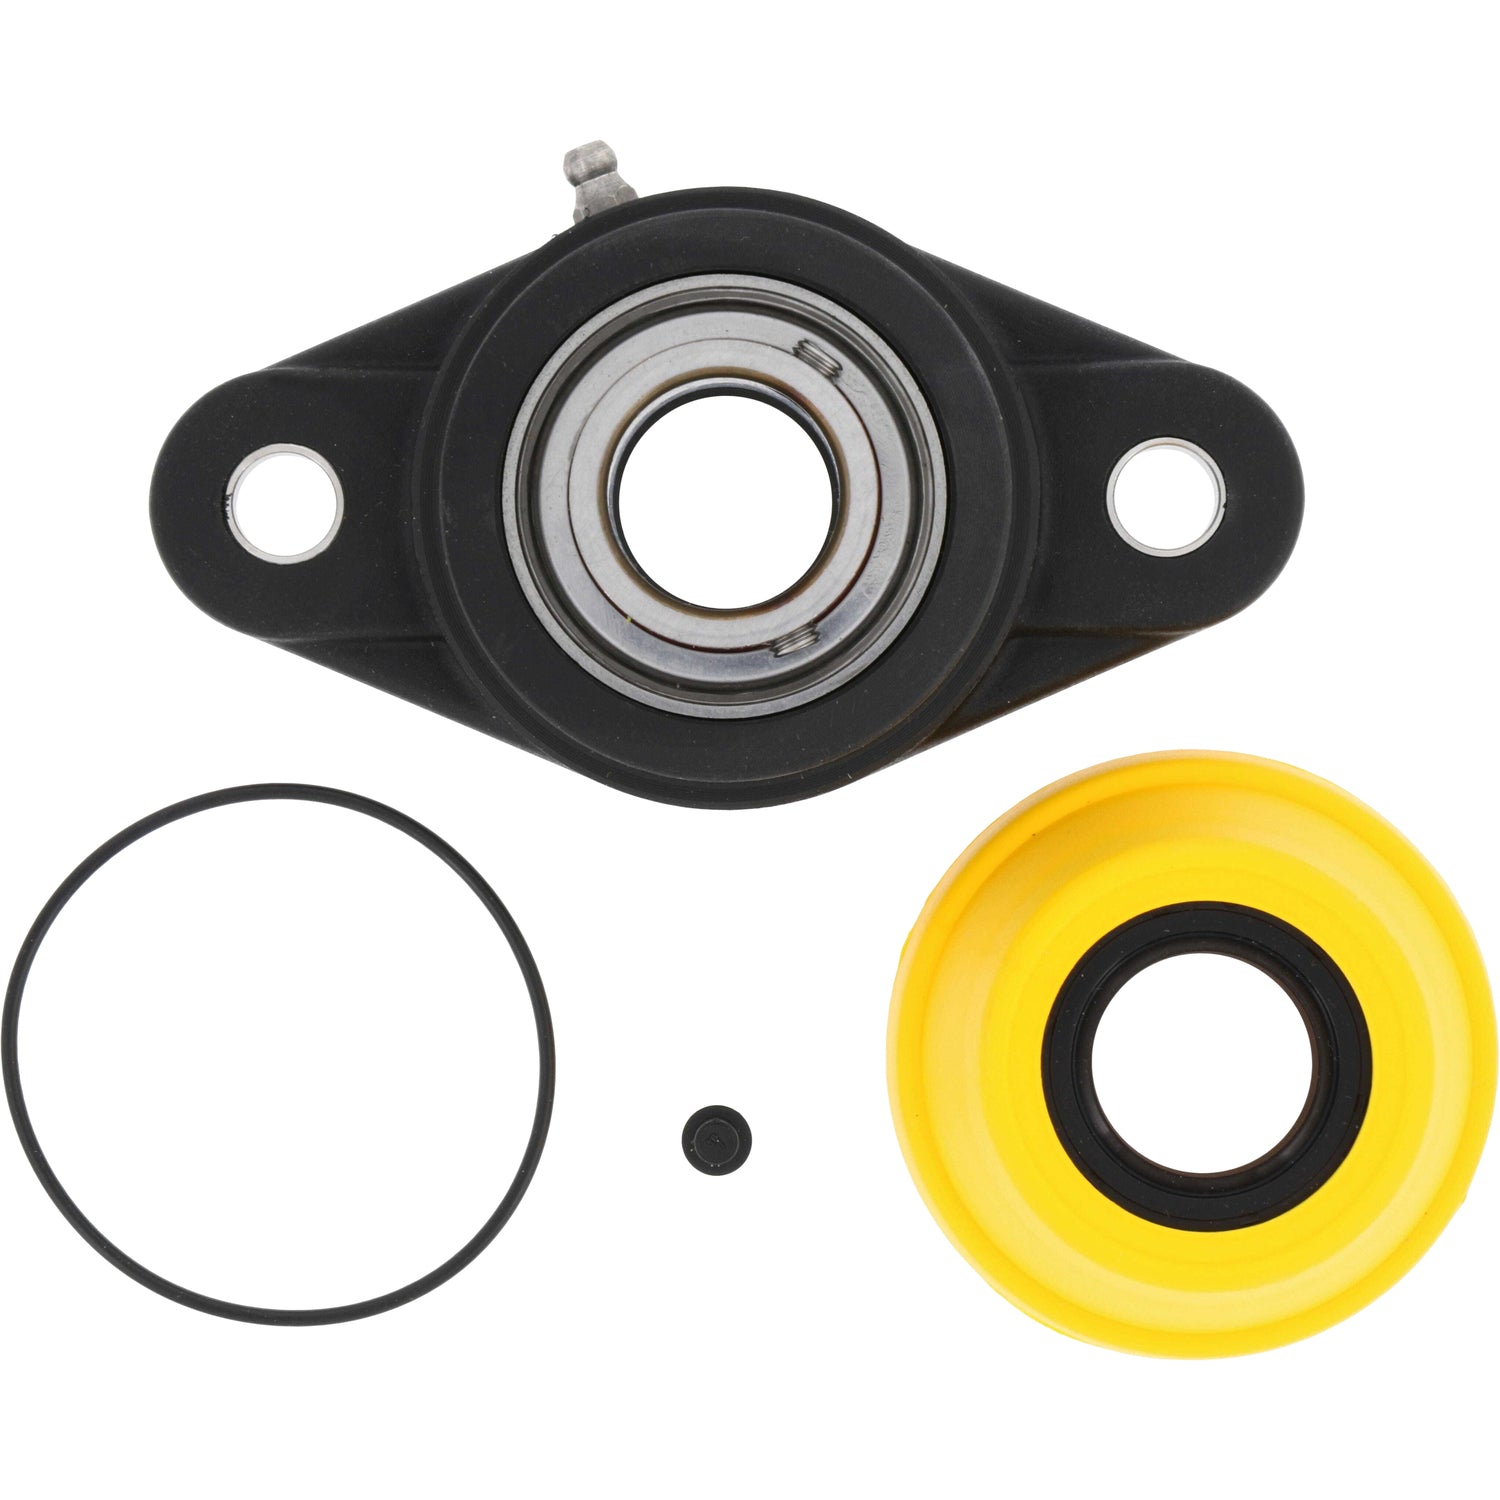 Black pillow block with exposed internal bearing,  stainless steel grease zerk and yellow cap with hole in center and rubber o-ringon white background.